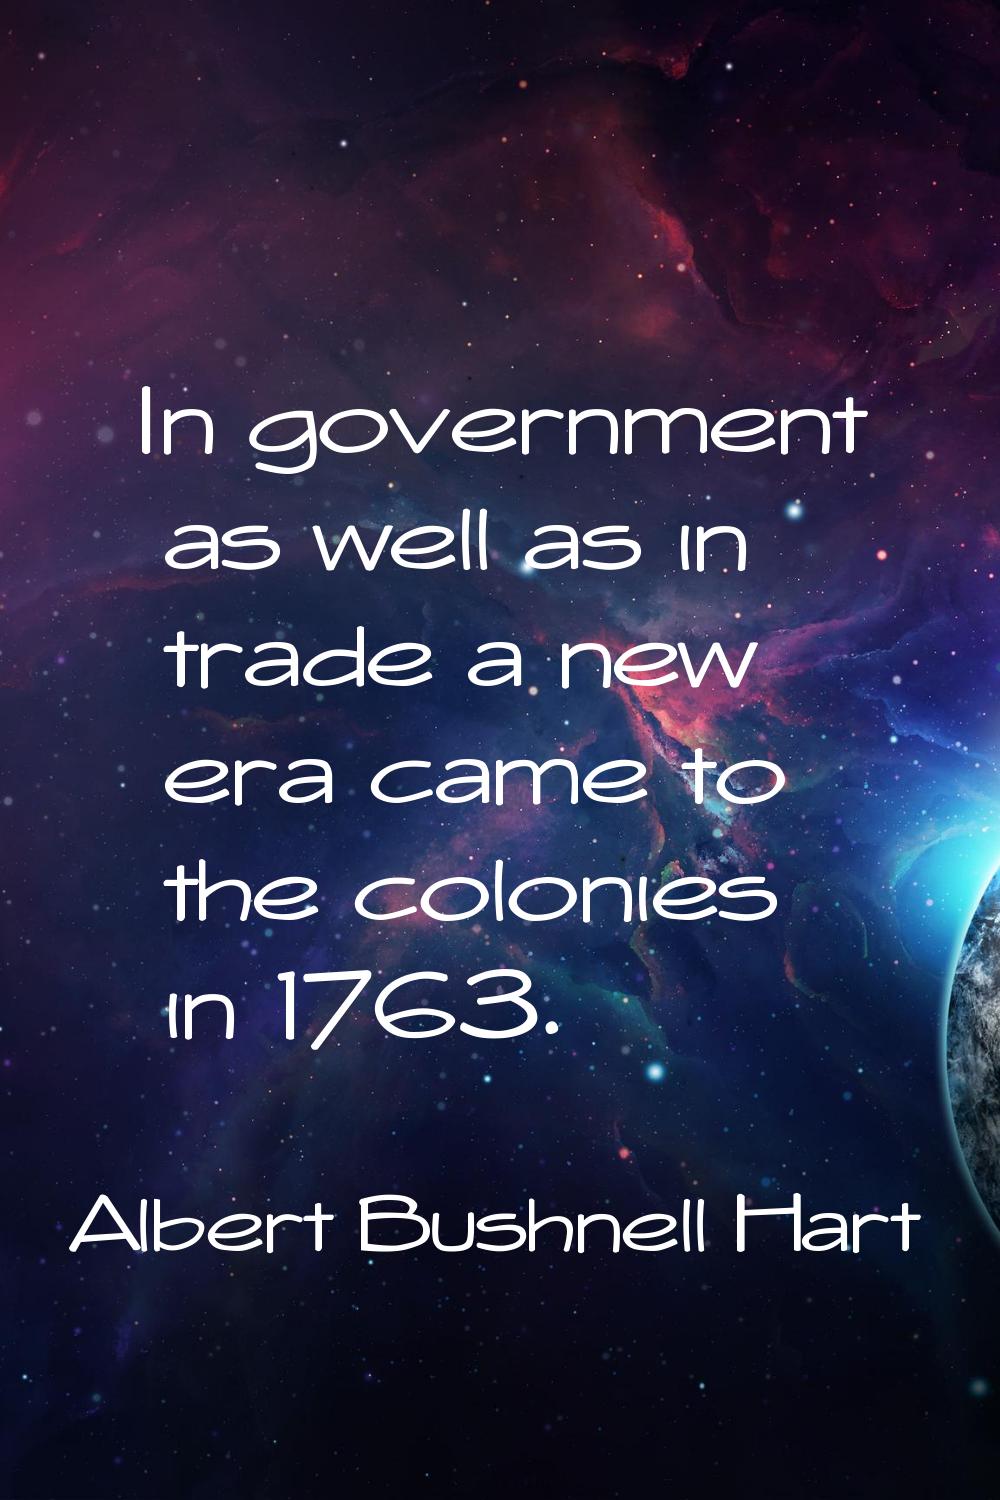 In government as well as in trade a new era came to the colonies in 1763.